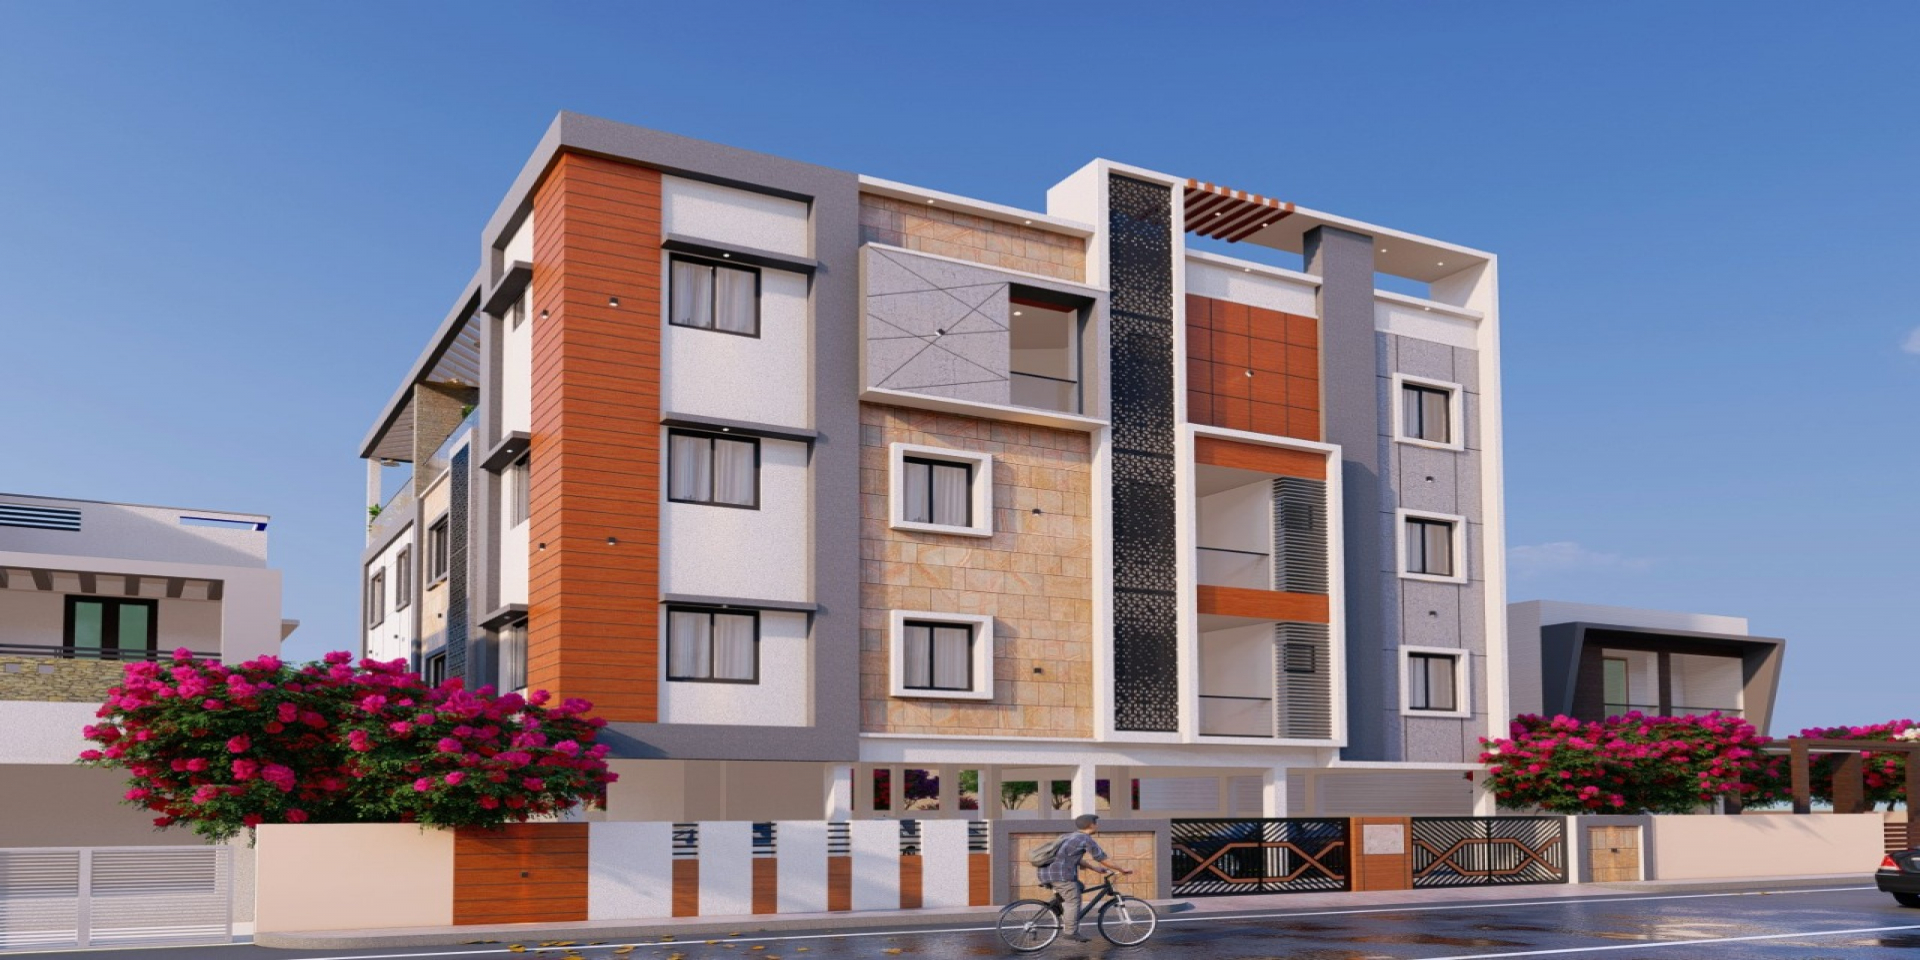 2, 3 BHK Apartment for sale in Sithalapakkam